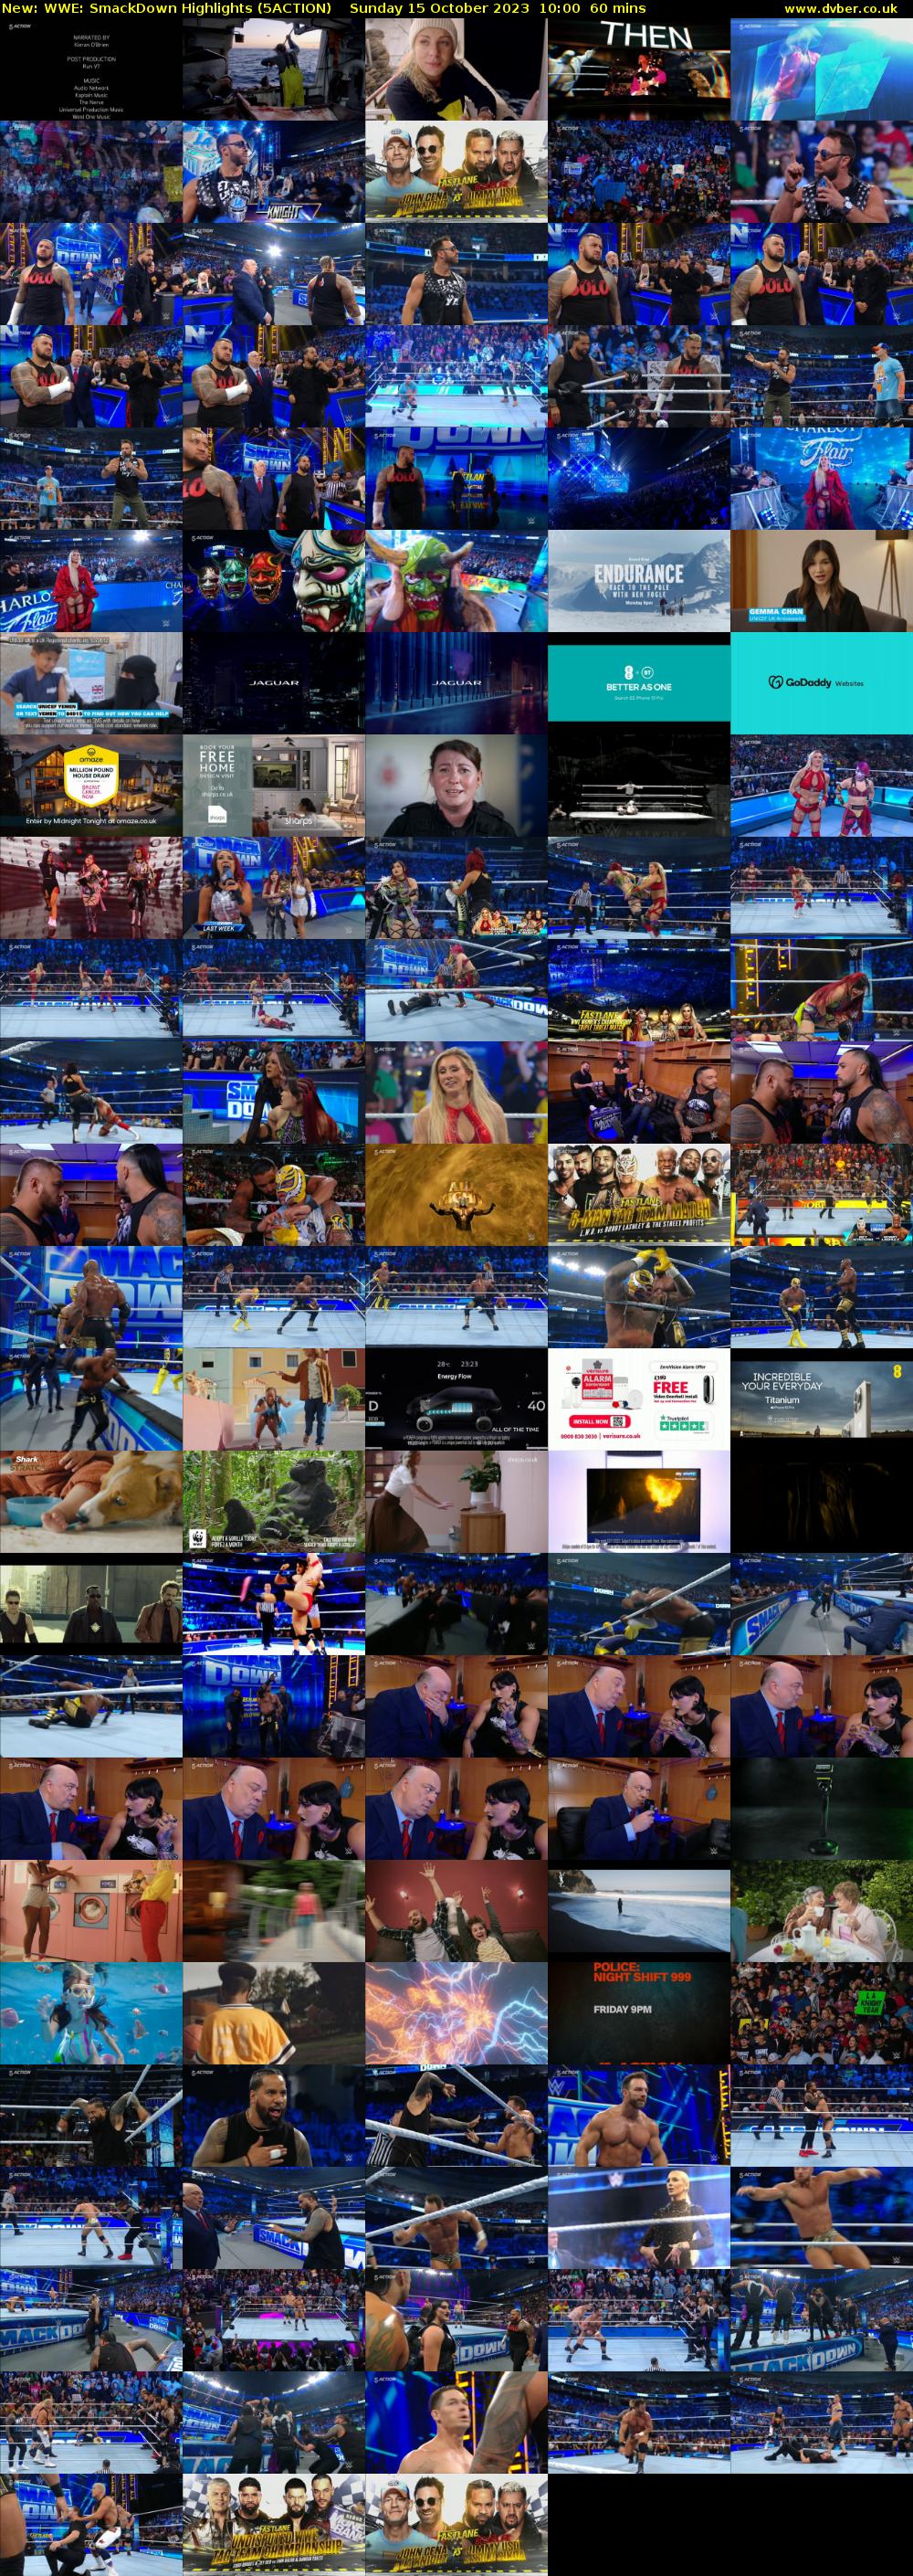 WWE: SmackDown Highlights (5ACTION) Sunday 15 October 2023 10:00 - 11:00